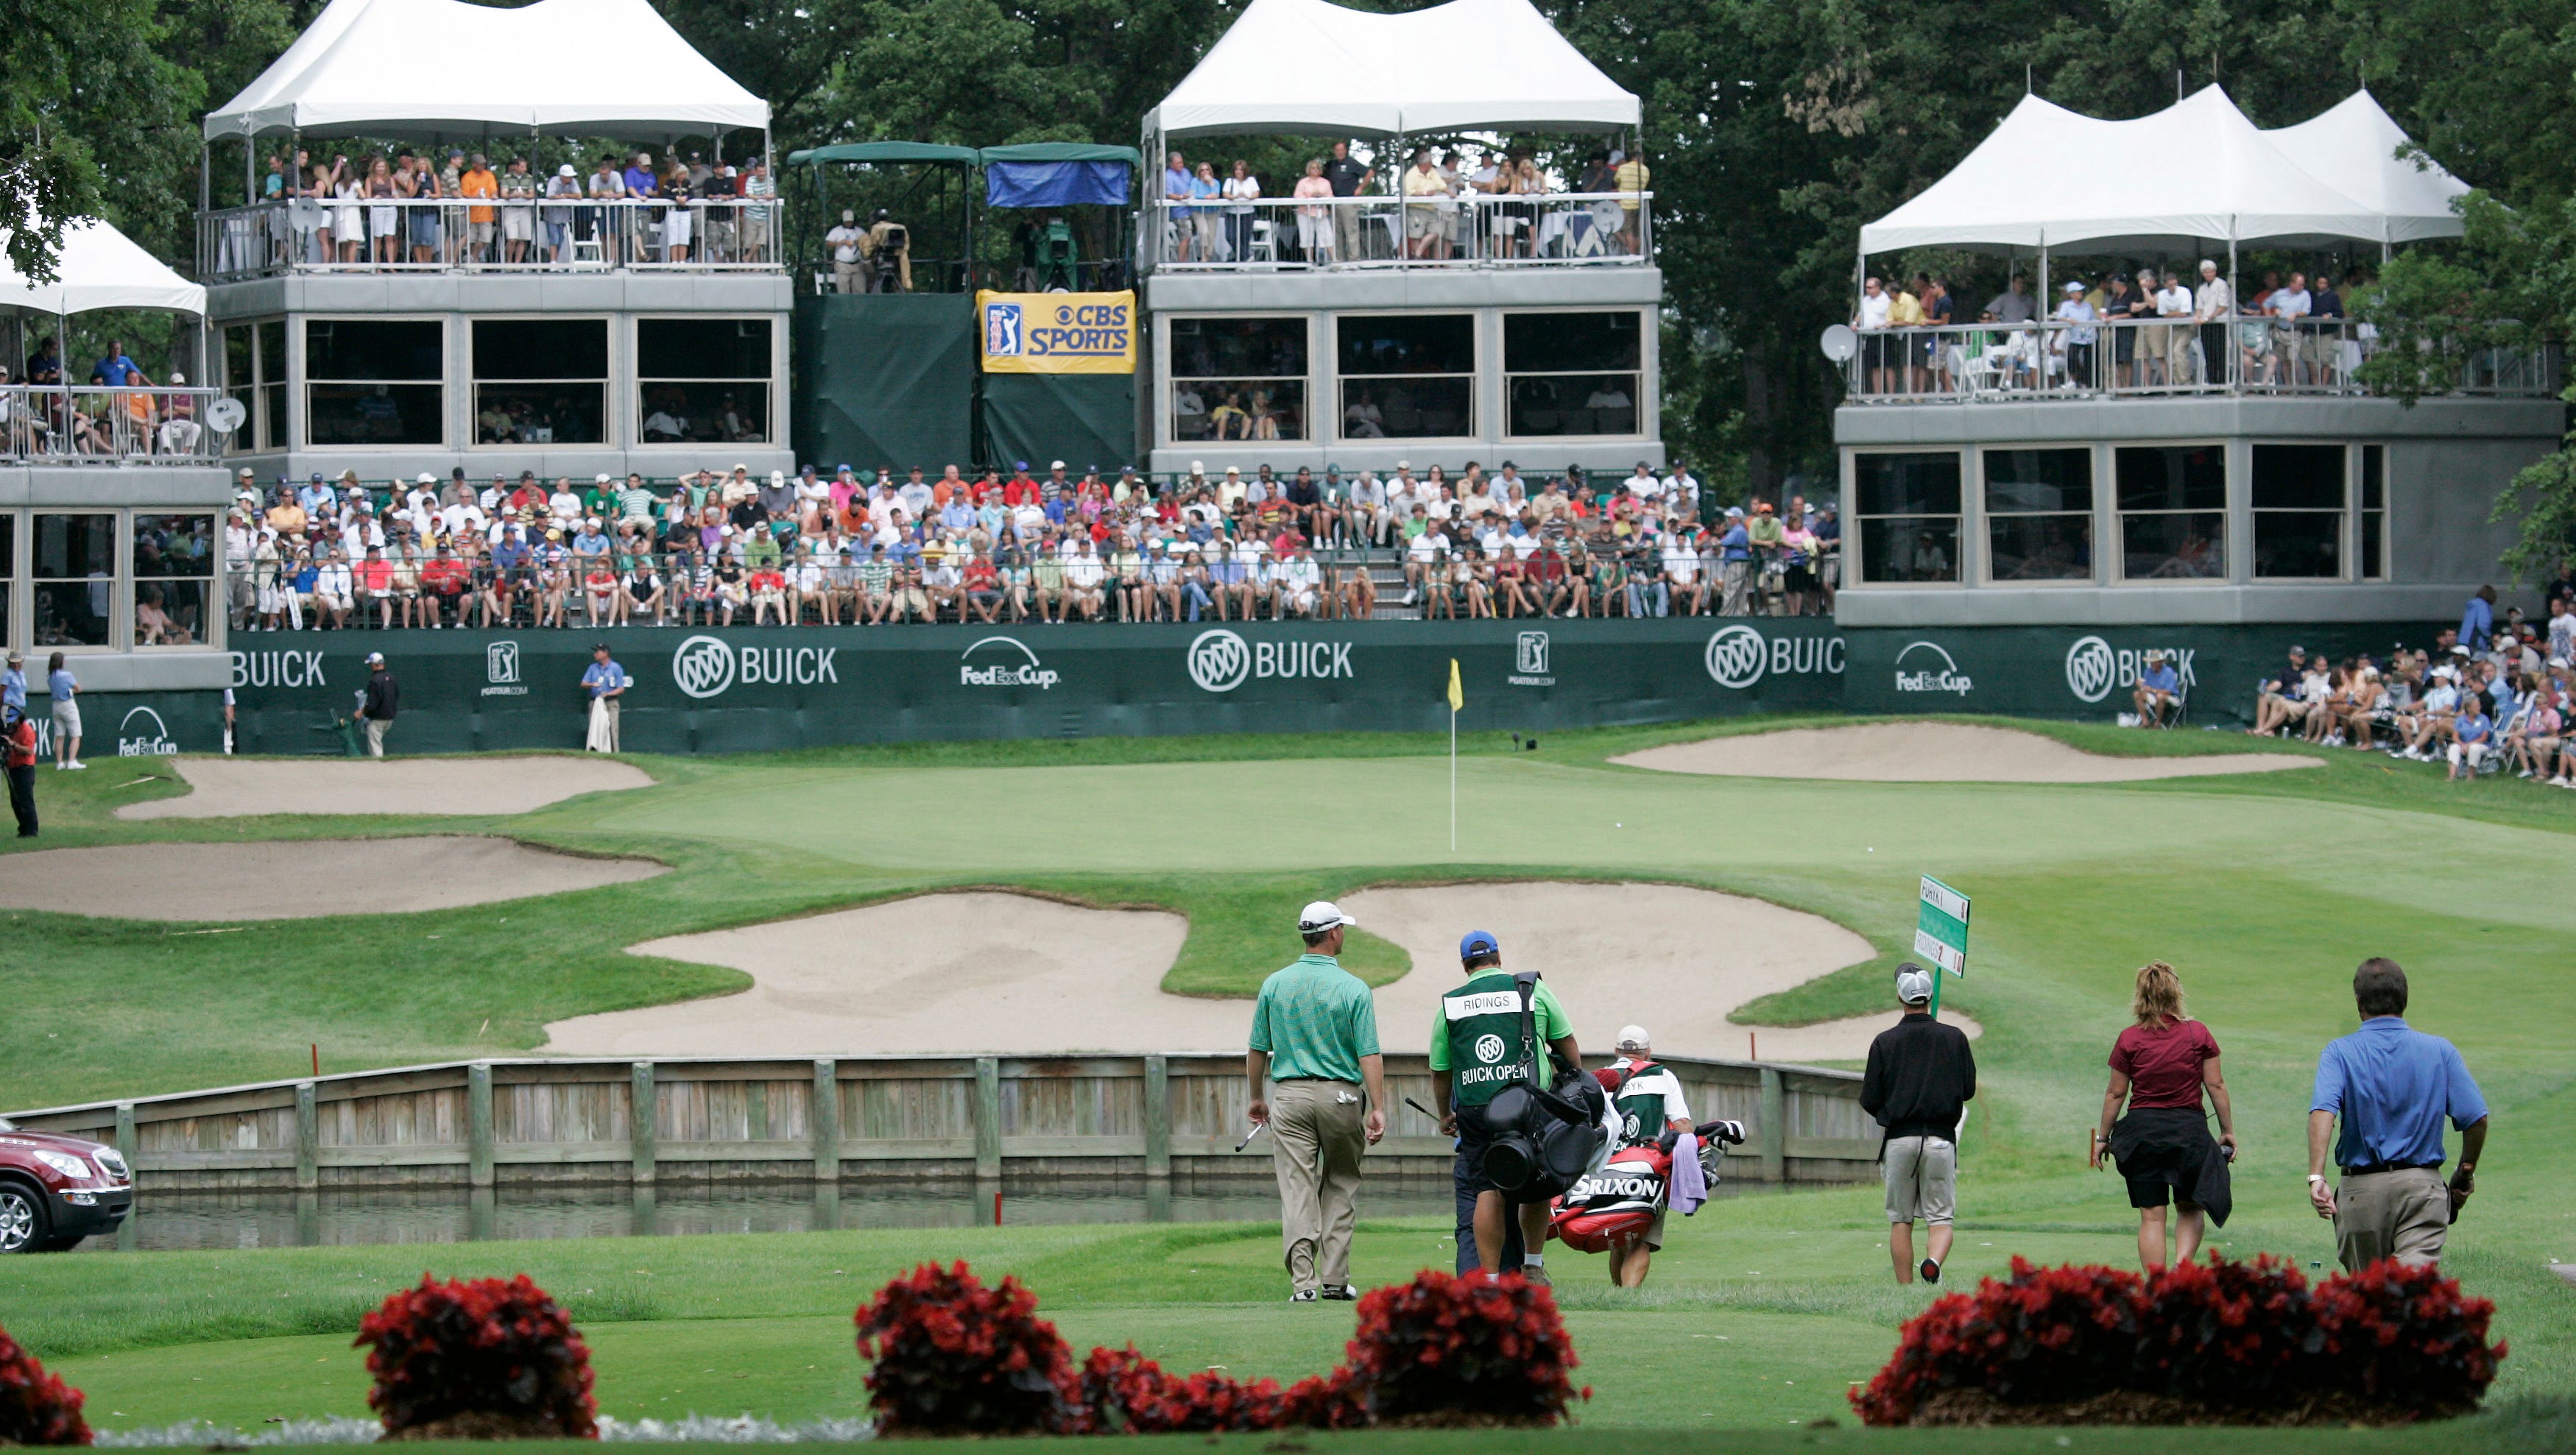 Tag Ridings walks up to the 17th green at the 2008 Buick Open. The 17th hole was once one of the rowdiest holes on the PGA Tour.